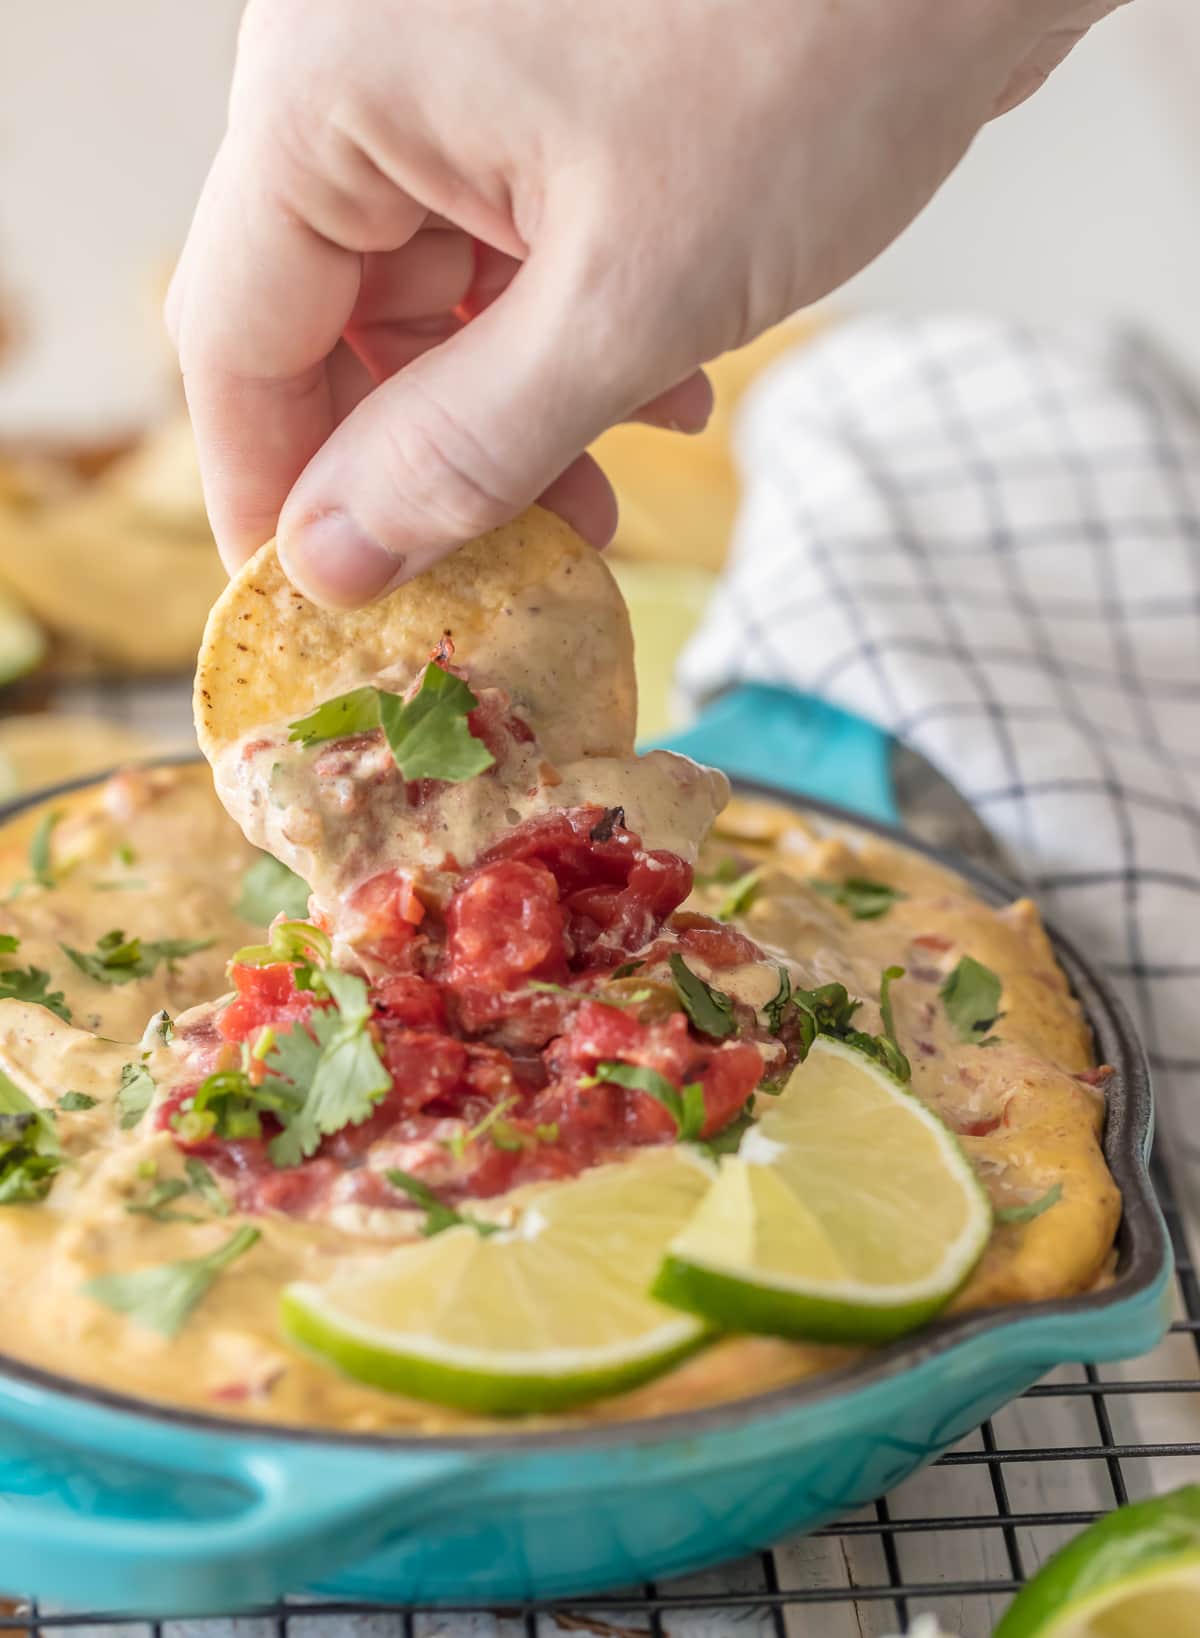 Dipping a chip into a bowl of vegan queso